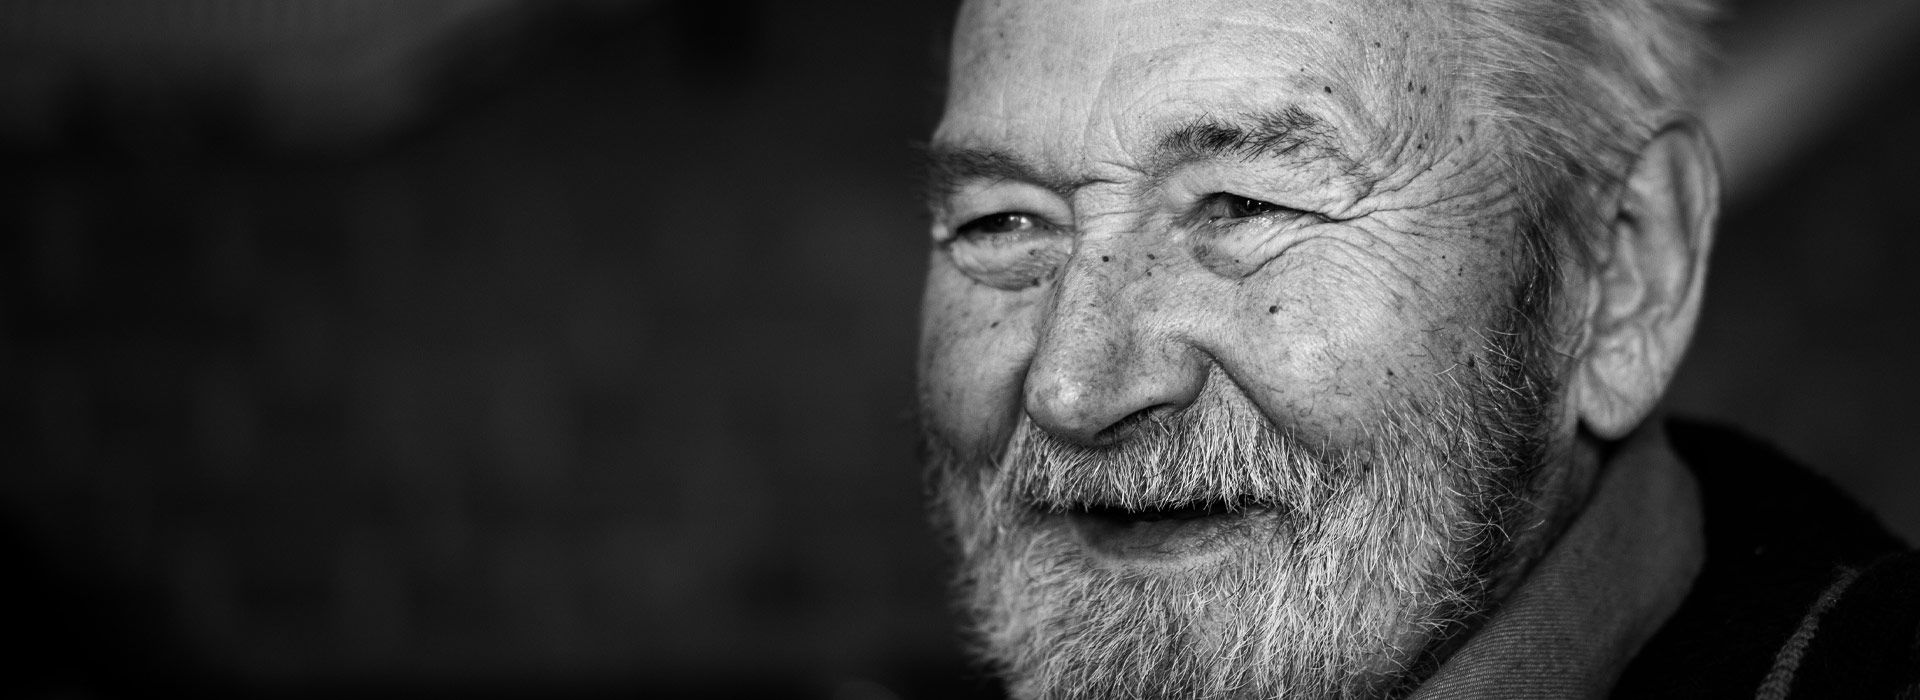 Black and white photo of a smiling elderly man